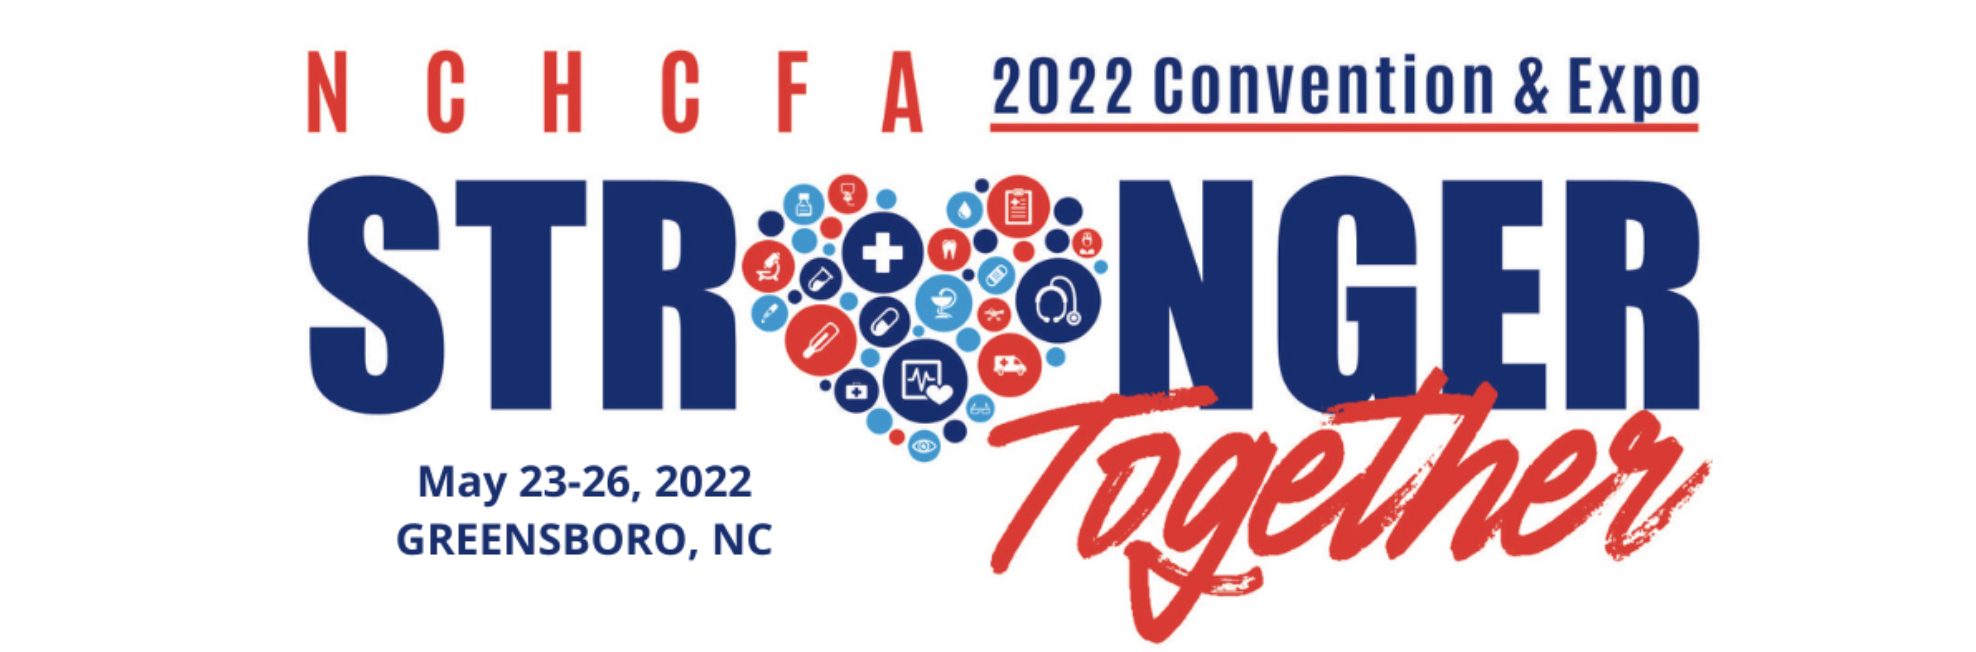 nchcfa-2022-annual-convention-and-expo